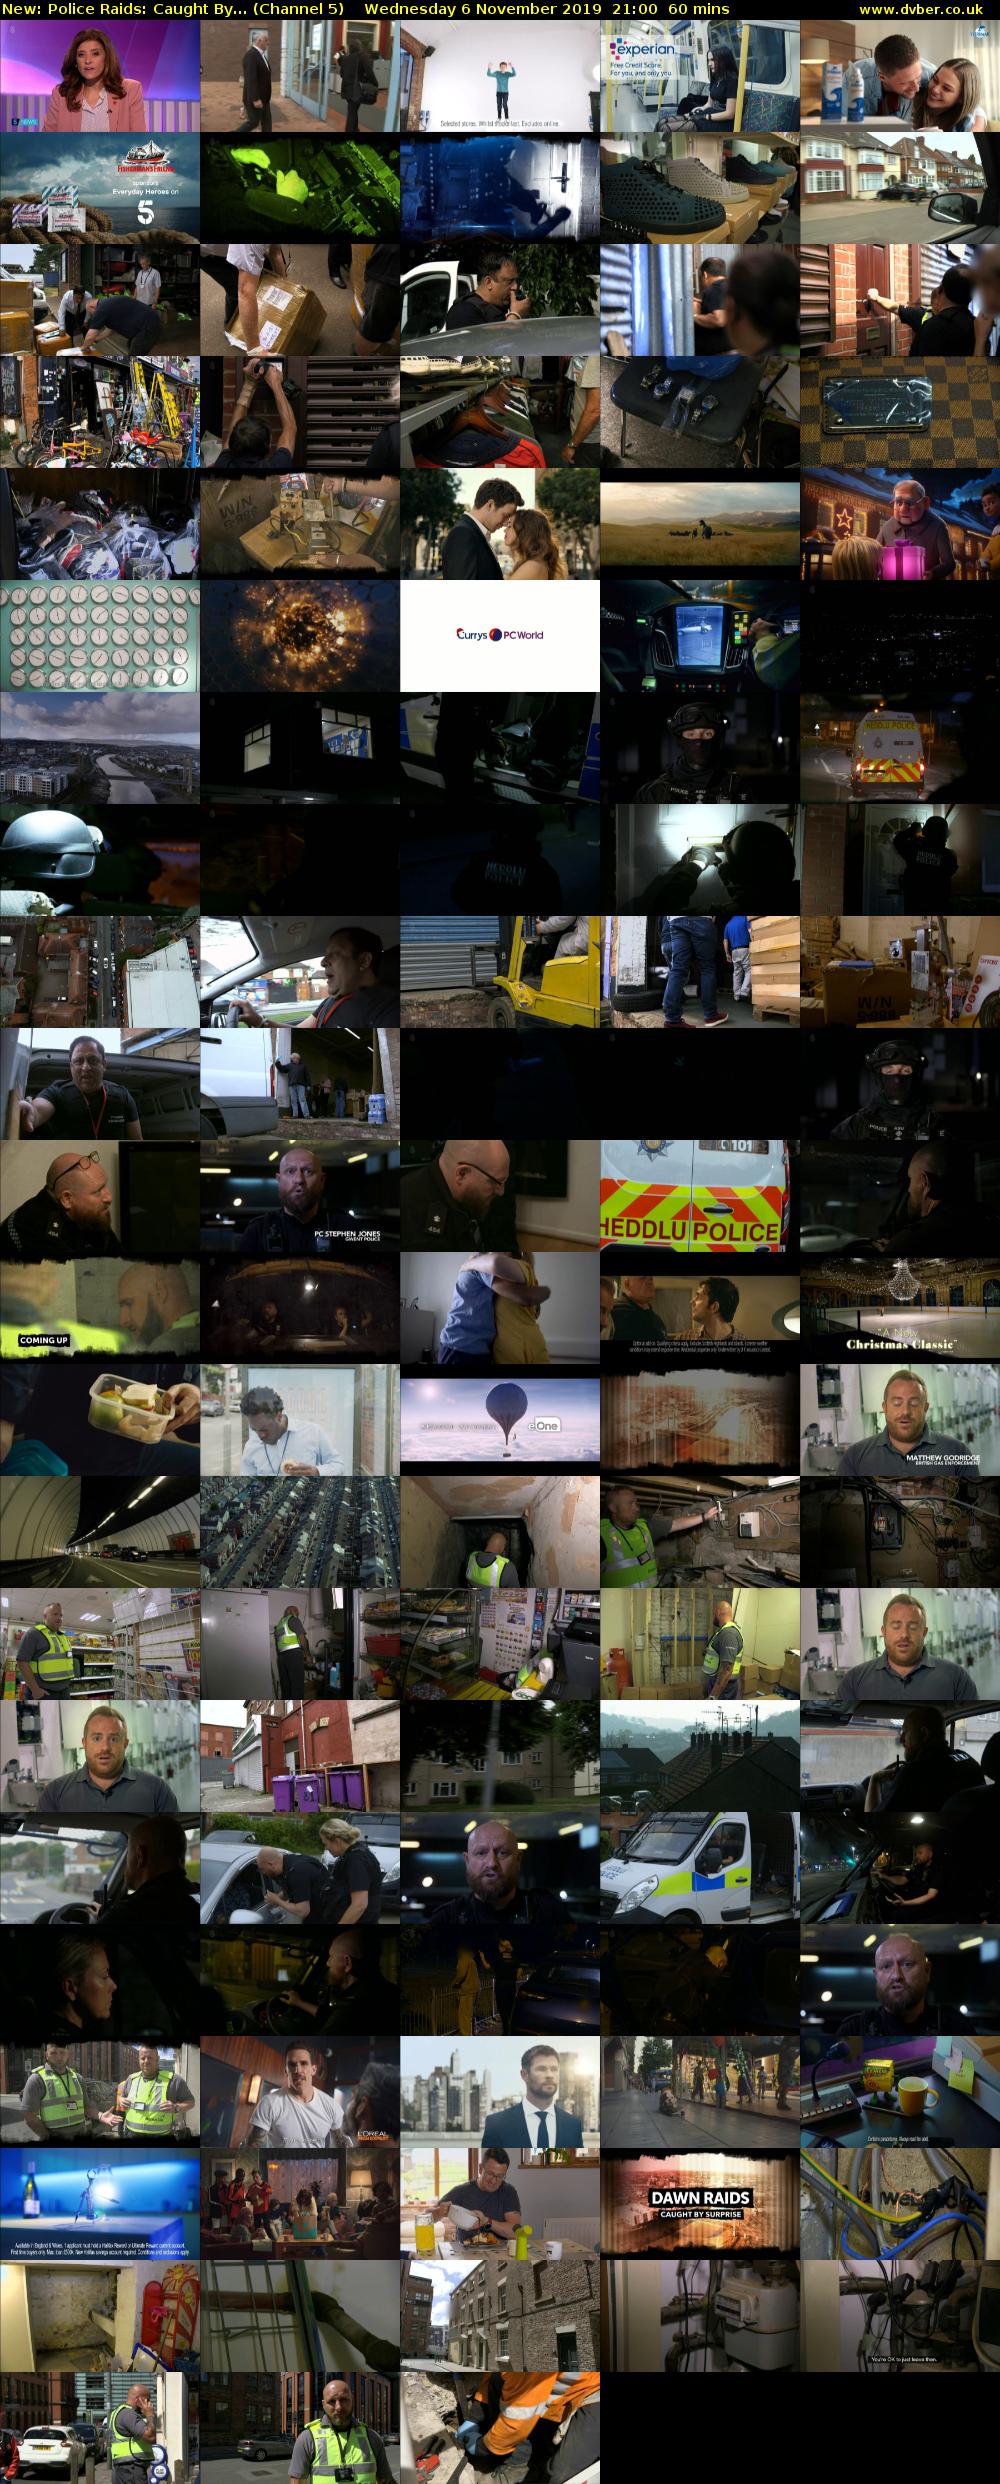 Police Raids: Caught By... (Channel 5) Wednesday 6 November 2019 21:00 - 22:00